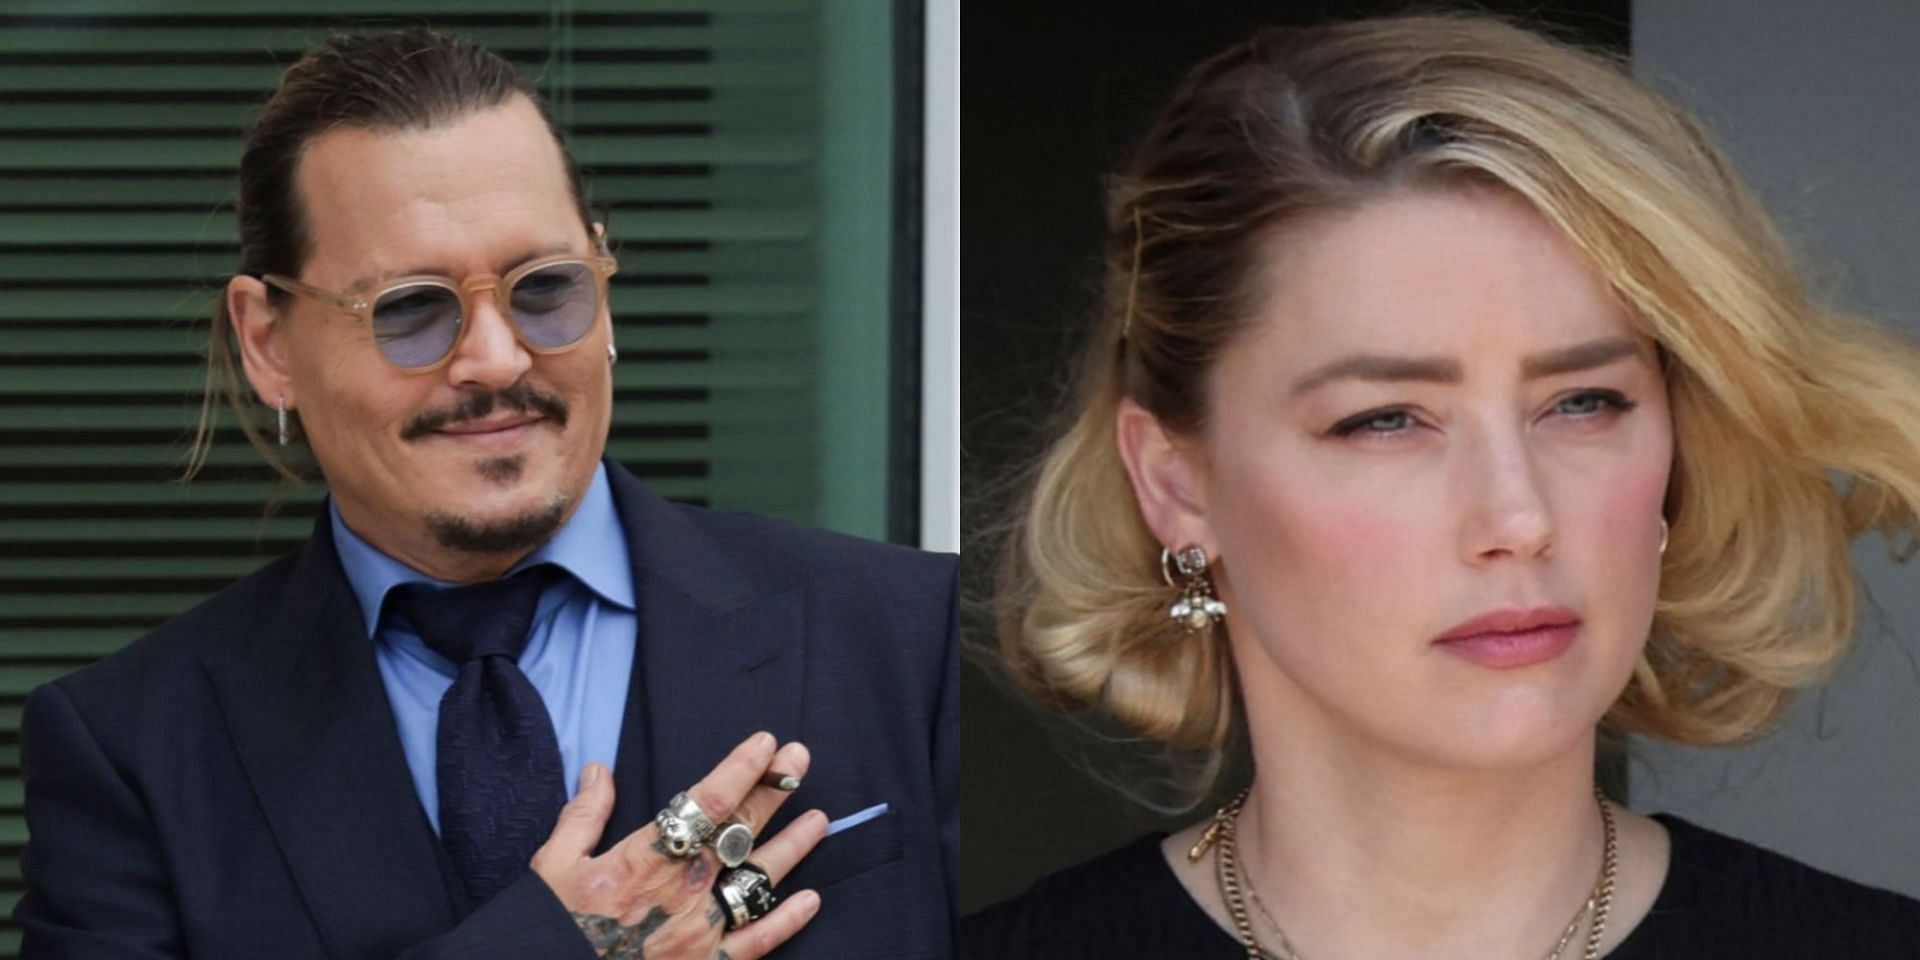 Amber Heard currently owes $8.35 million to Johnny Depp (Image via Getty Images)